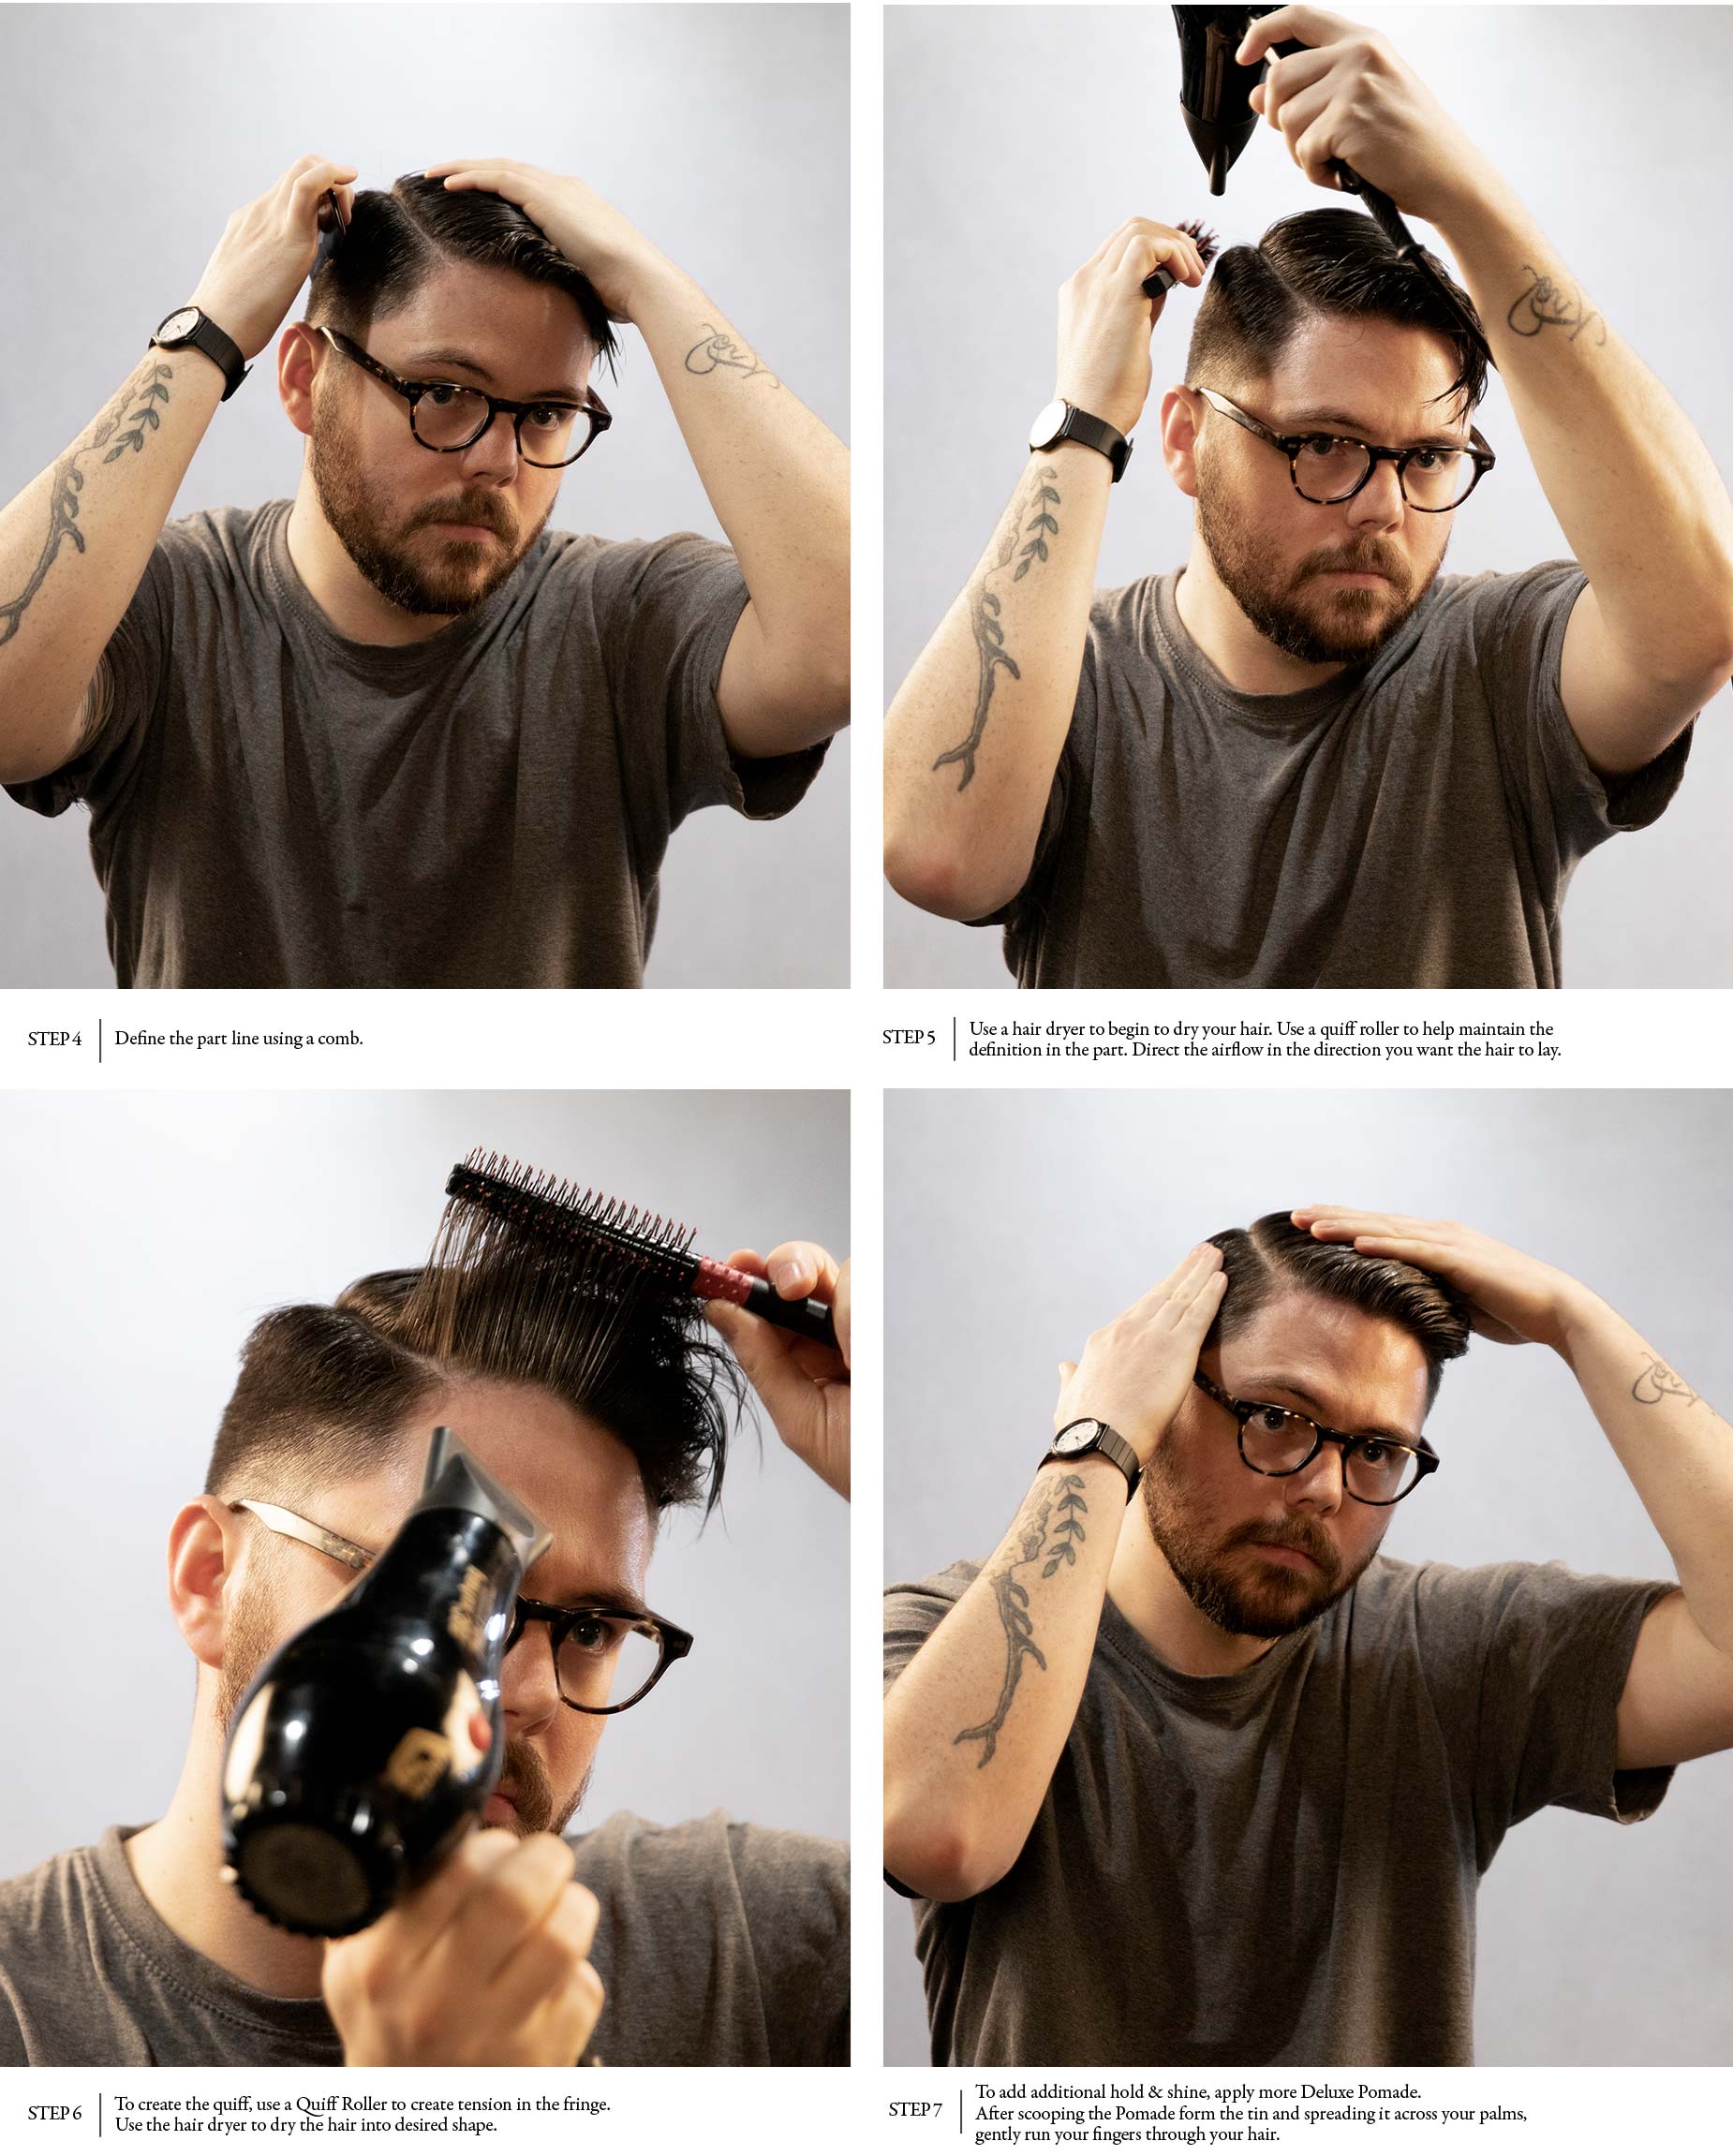 How to Style - Side Parted Quiff